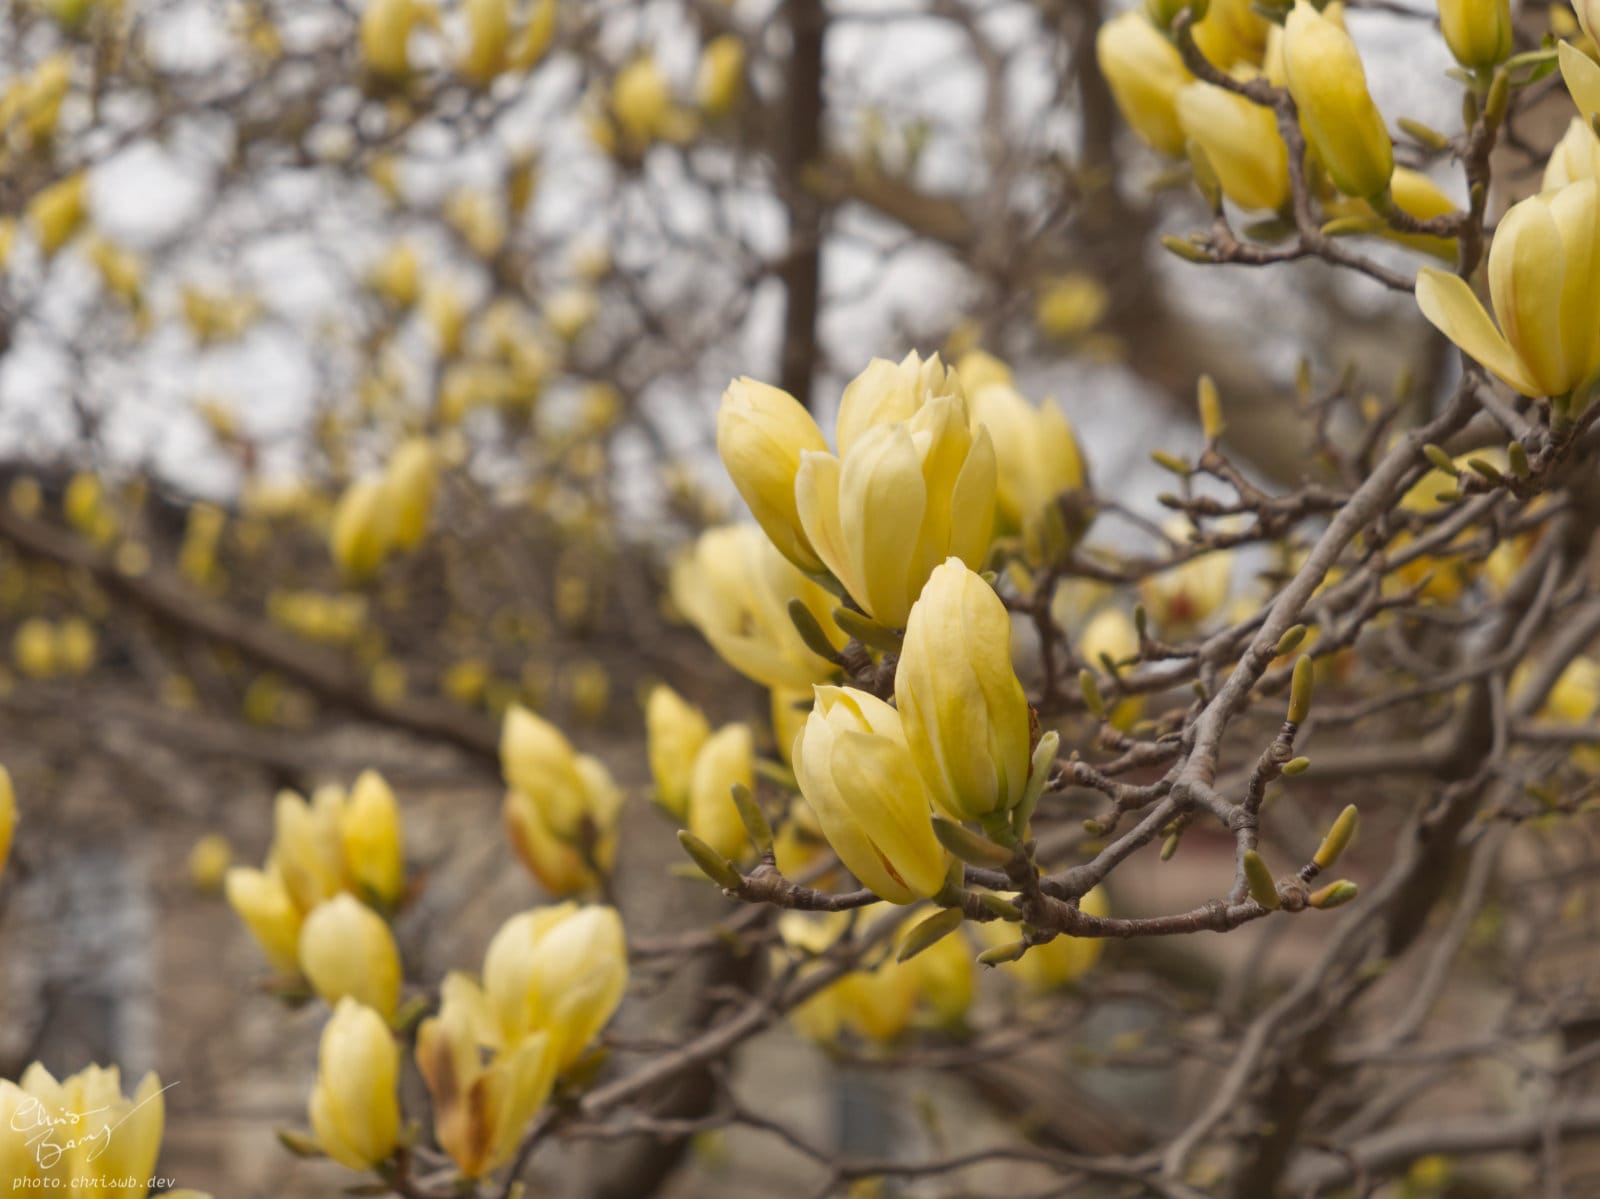 A shallow depth of field photo of several branches of yellow magnolia flowers. the flowers are just starting to open